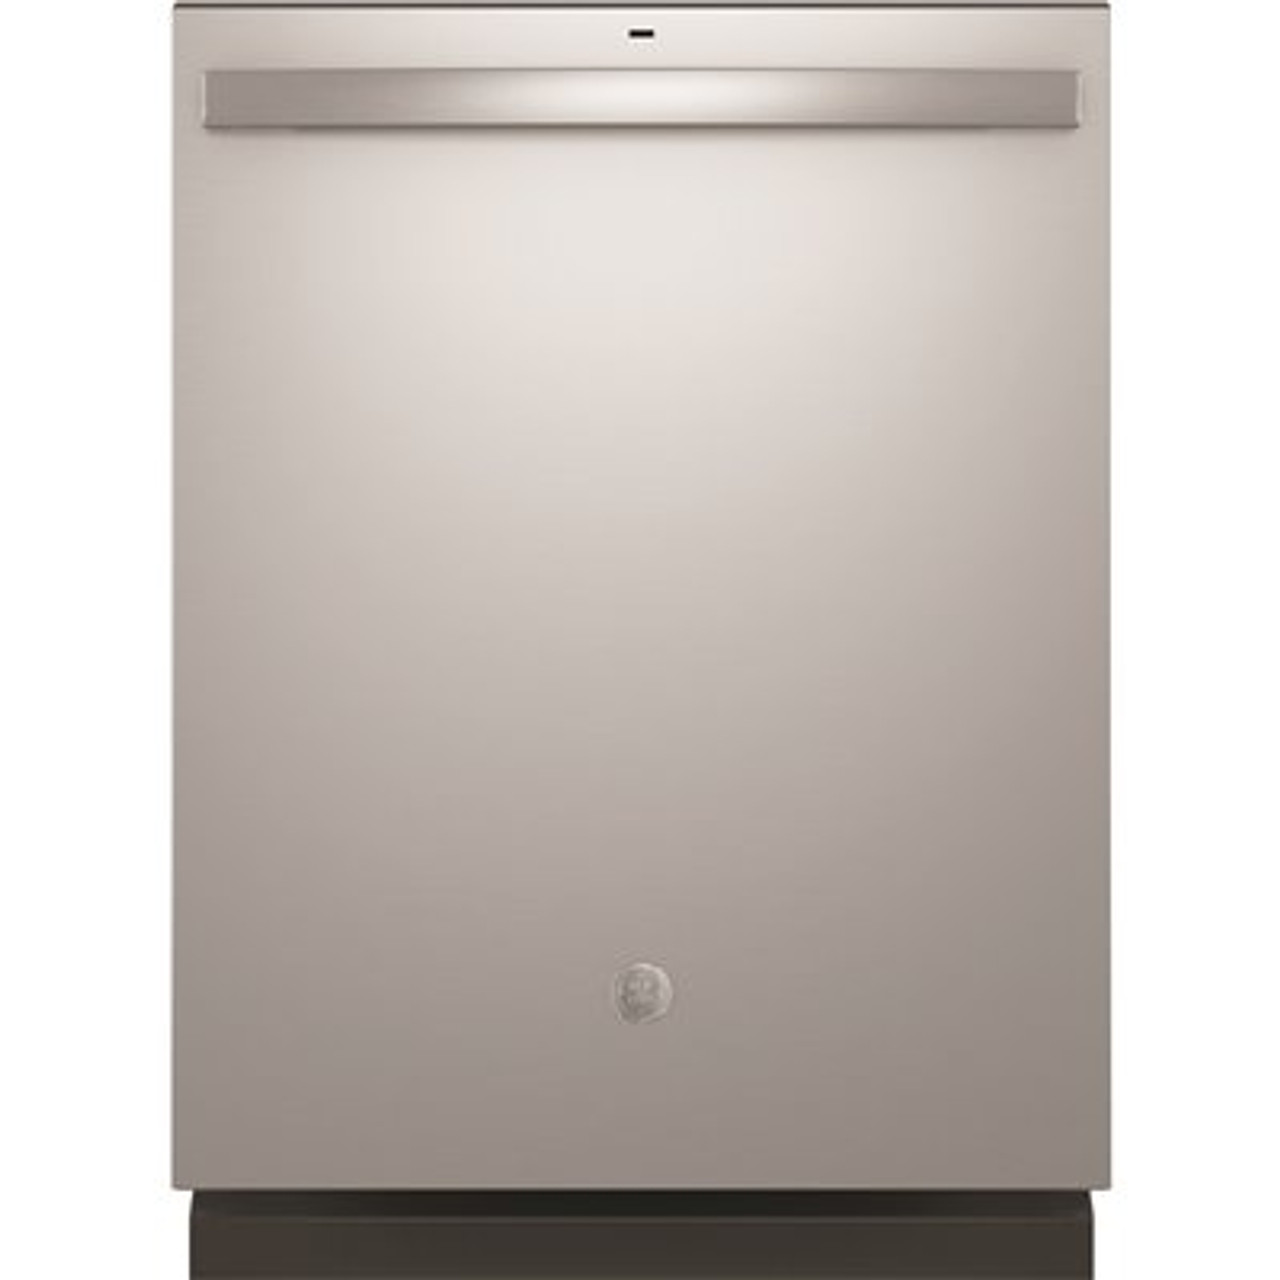 Ge 24 In. In Stainless Steel Top Control Smart Built-In Tall Tub Dishwasher With Stainless Steel Tub And Steam Cleaning